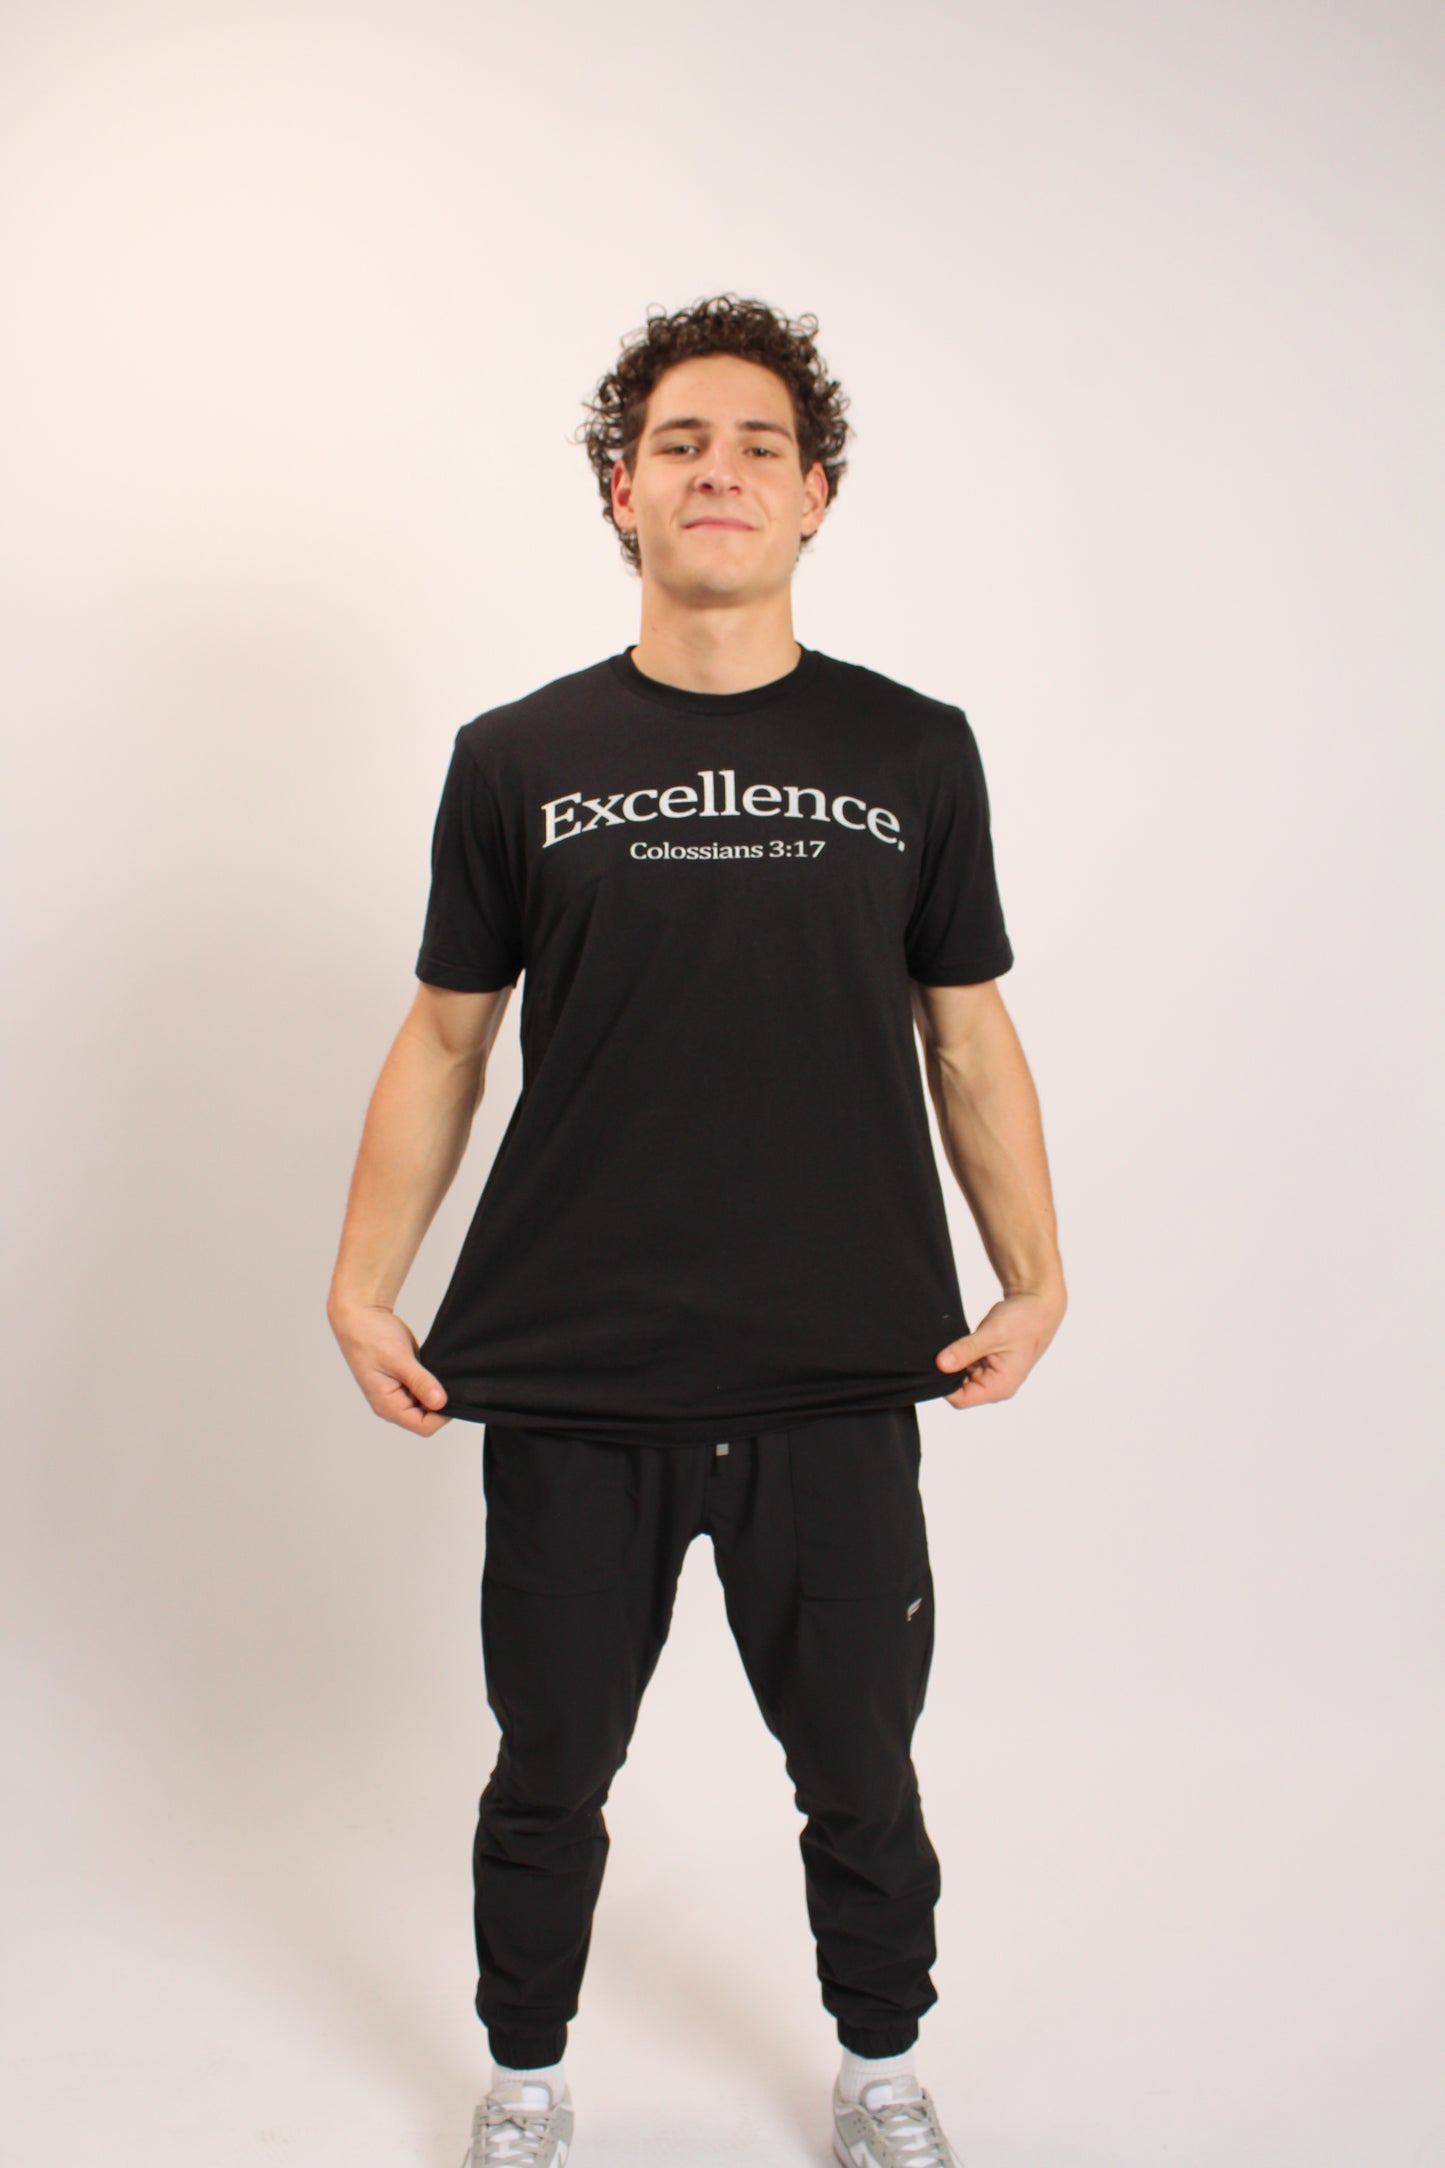 "Excellence" Slim-Fit T-shirt